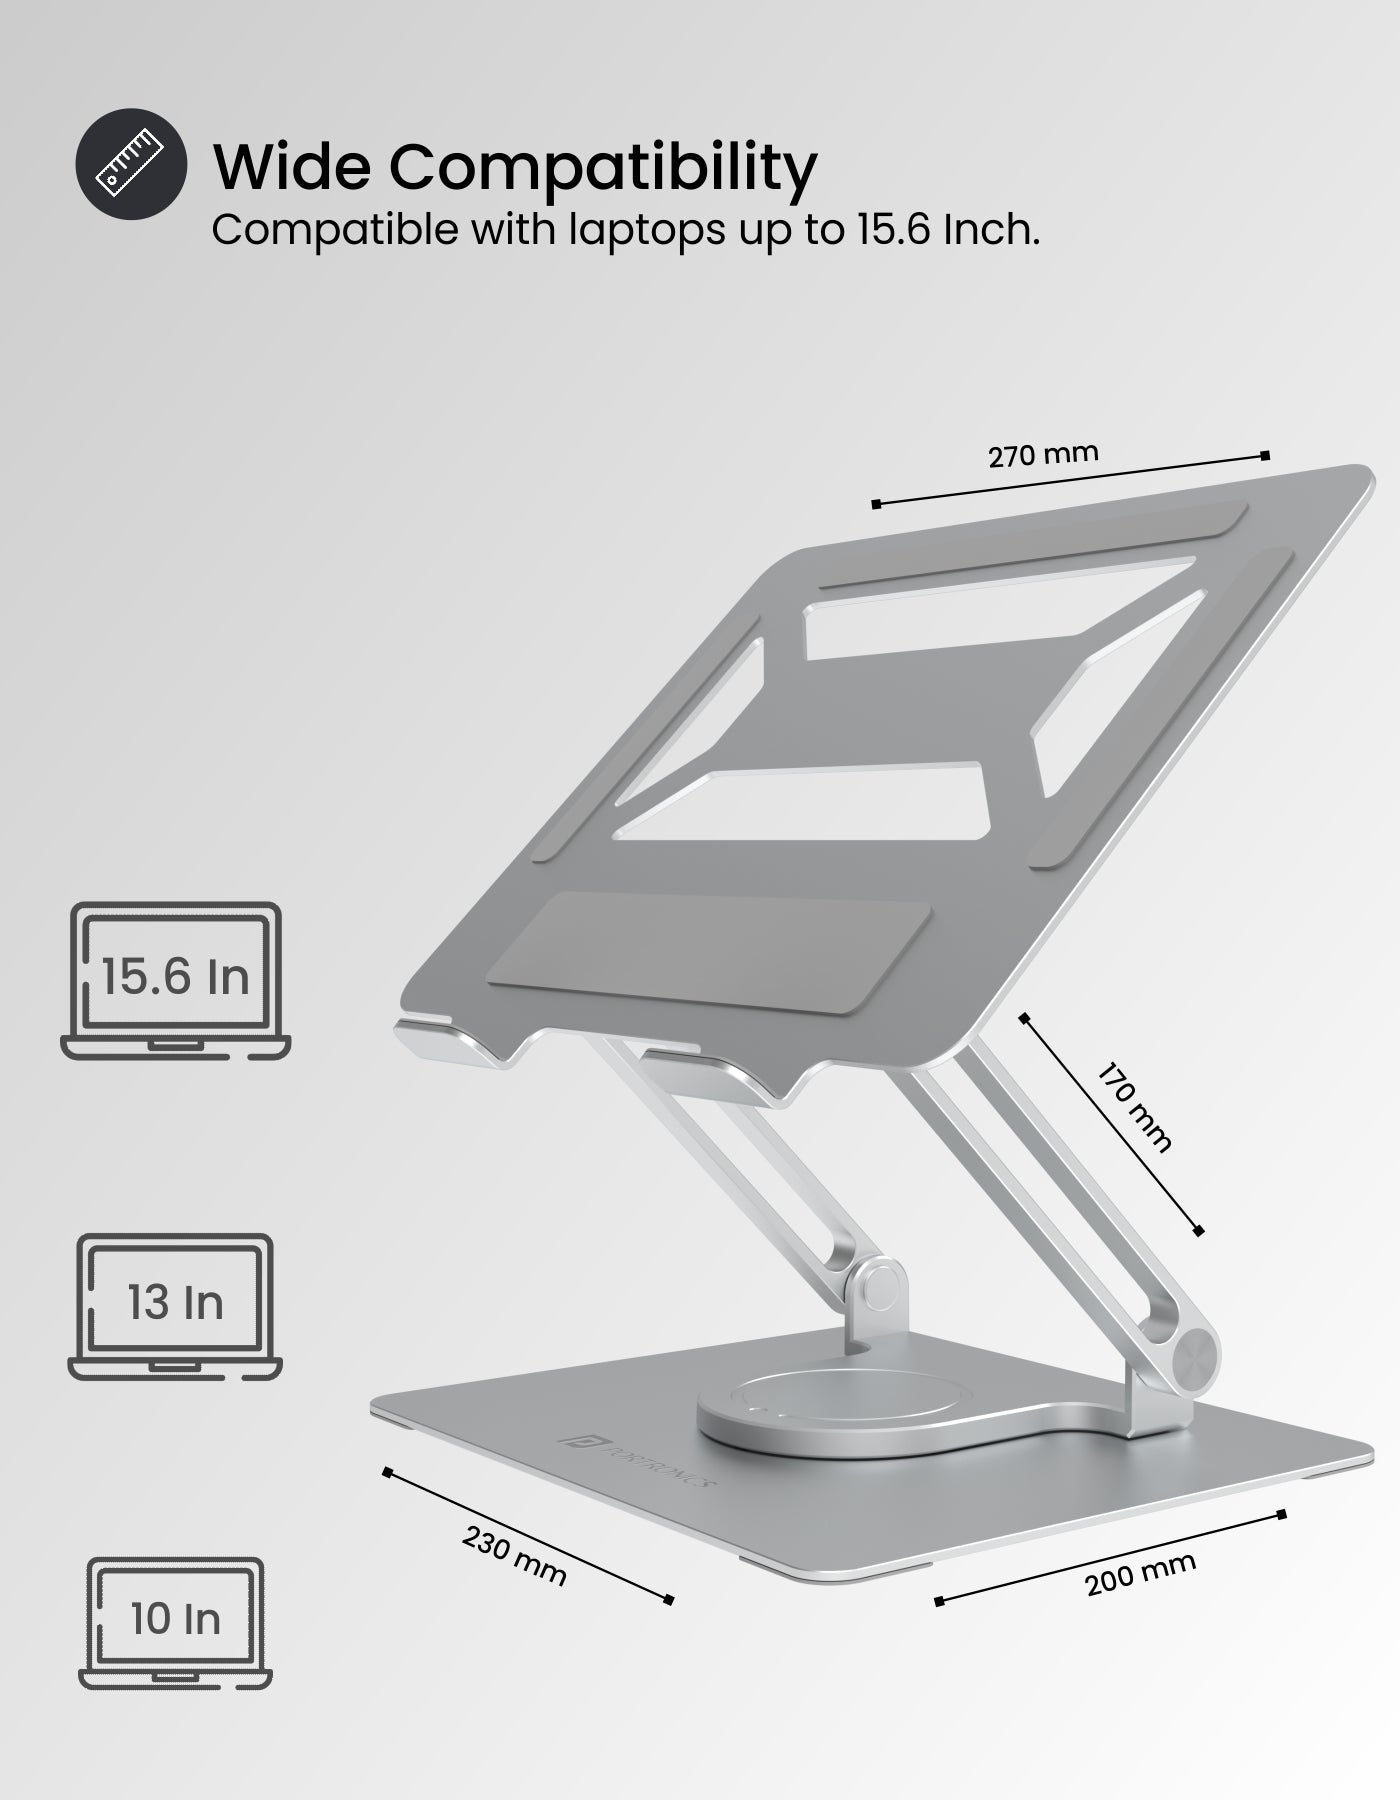 The design of portronics My buddy 5k portable laptop stand is ergonomic